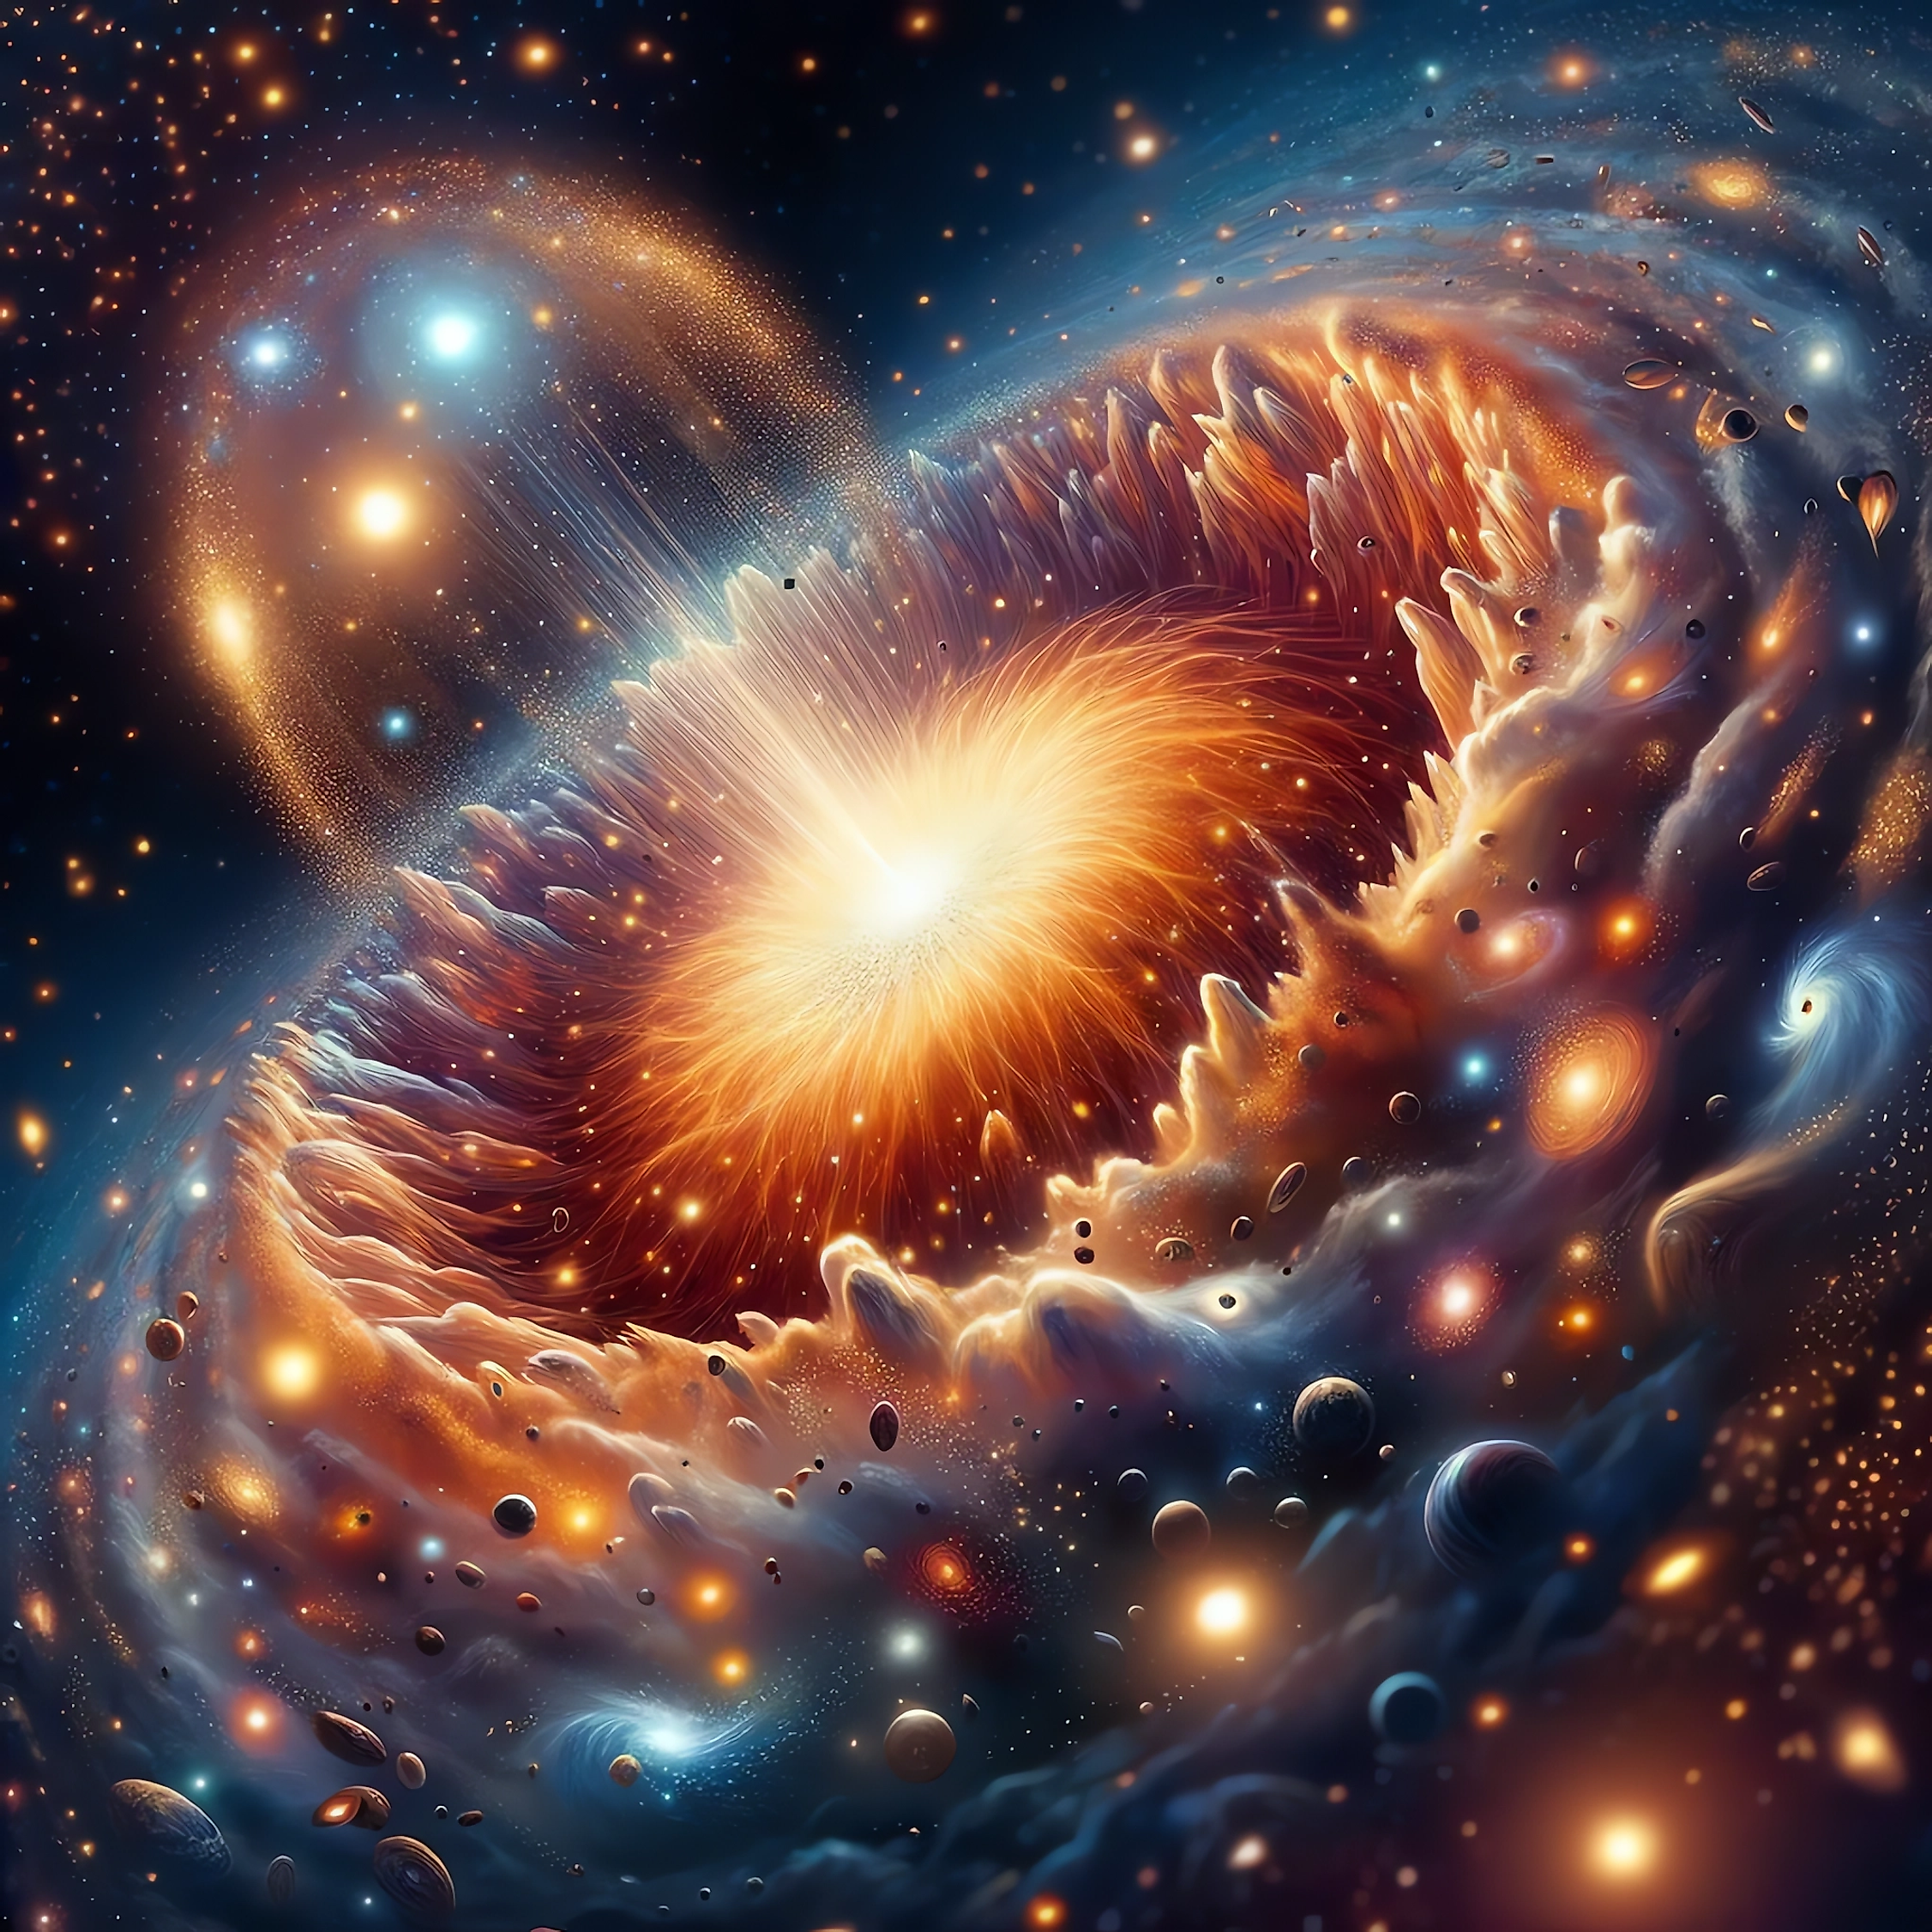 Illustration of the early moments of the universe